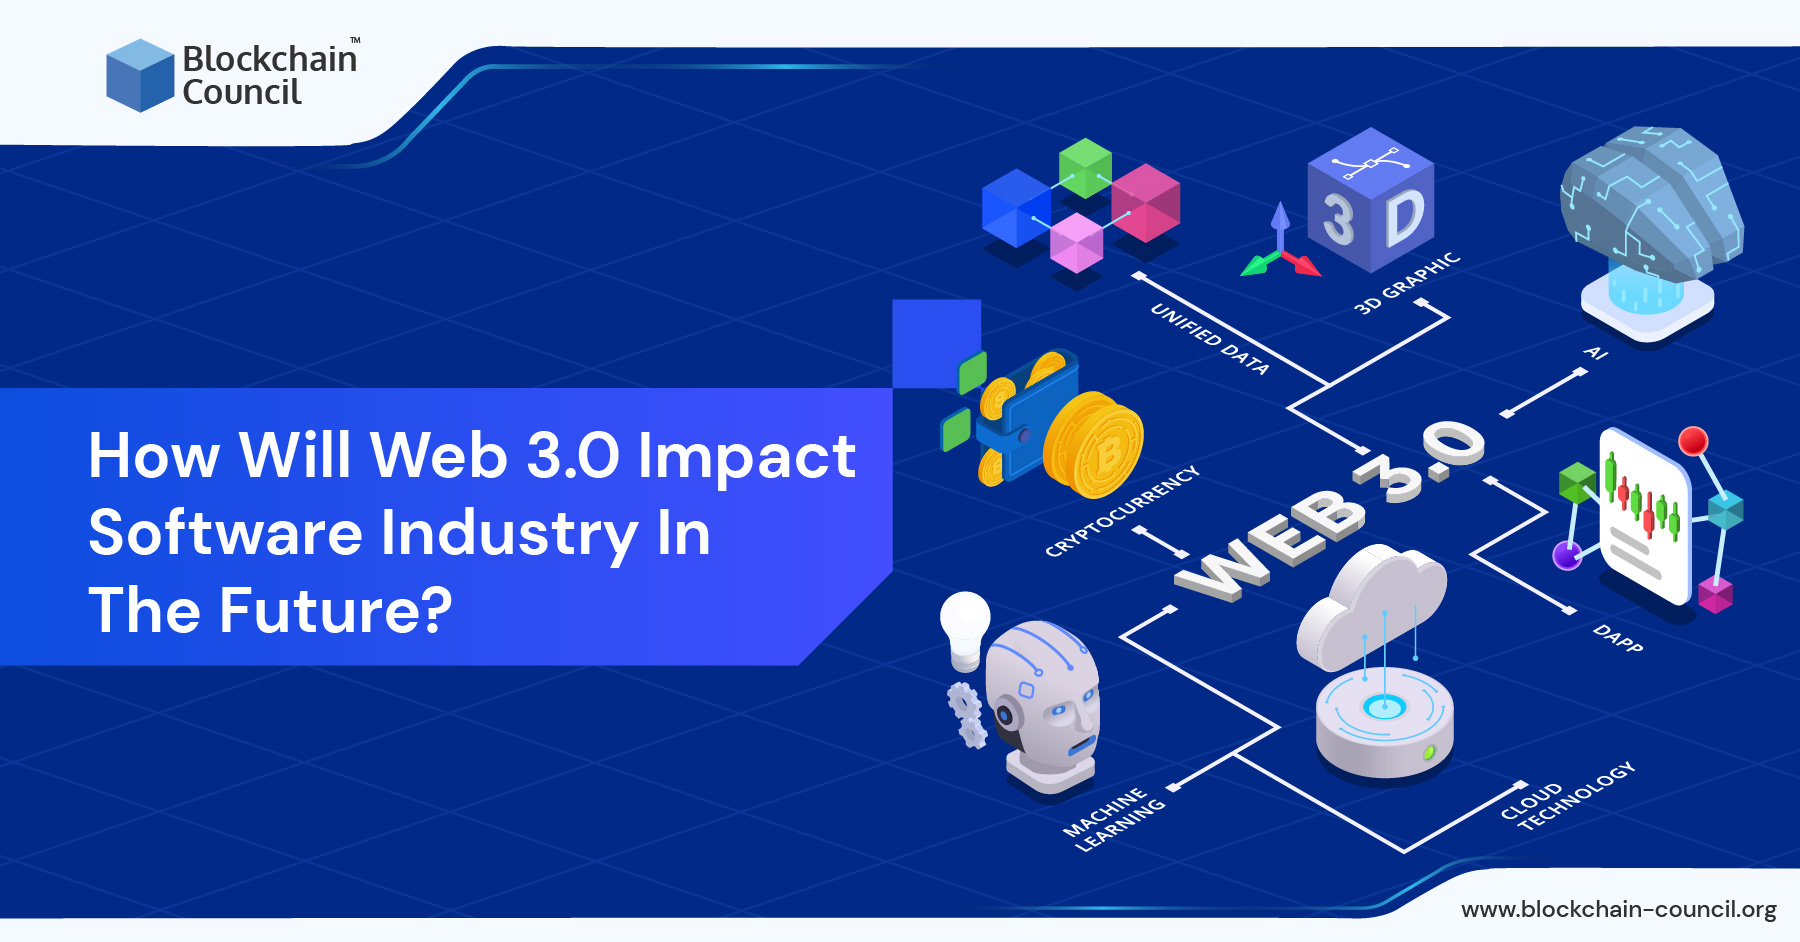 How Will Web 3.0 Impact Software Industry In The Future?